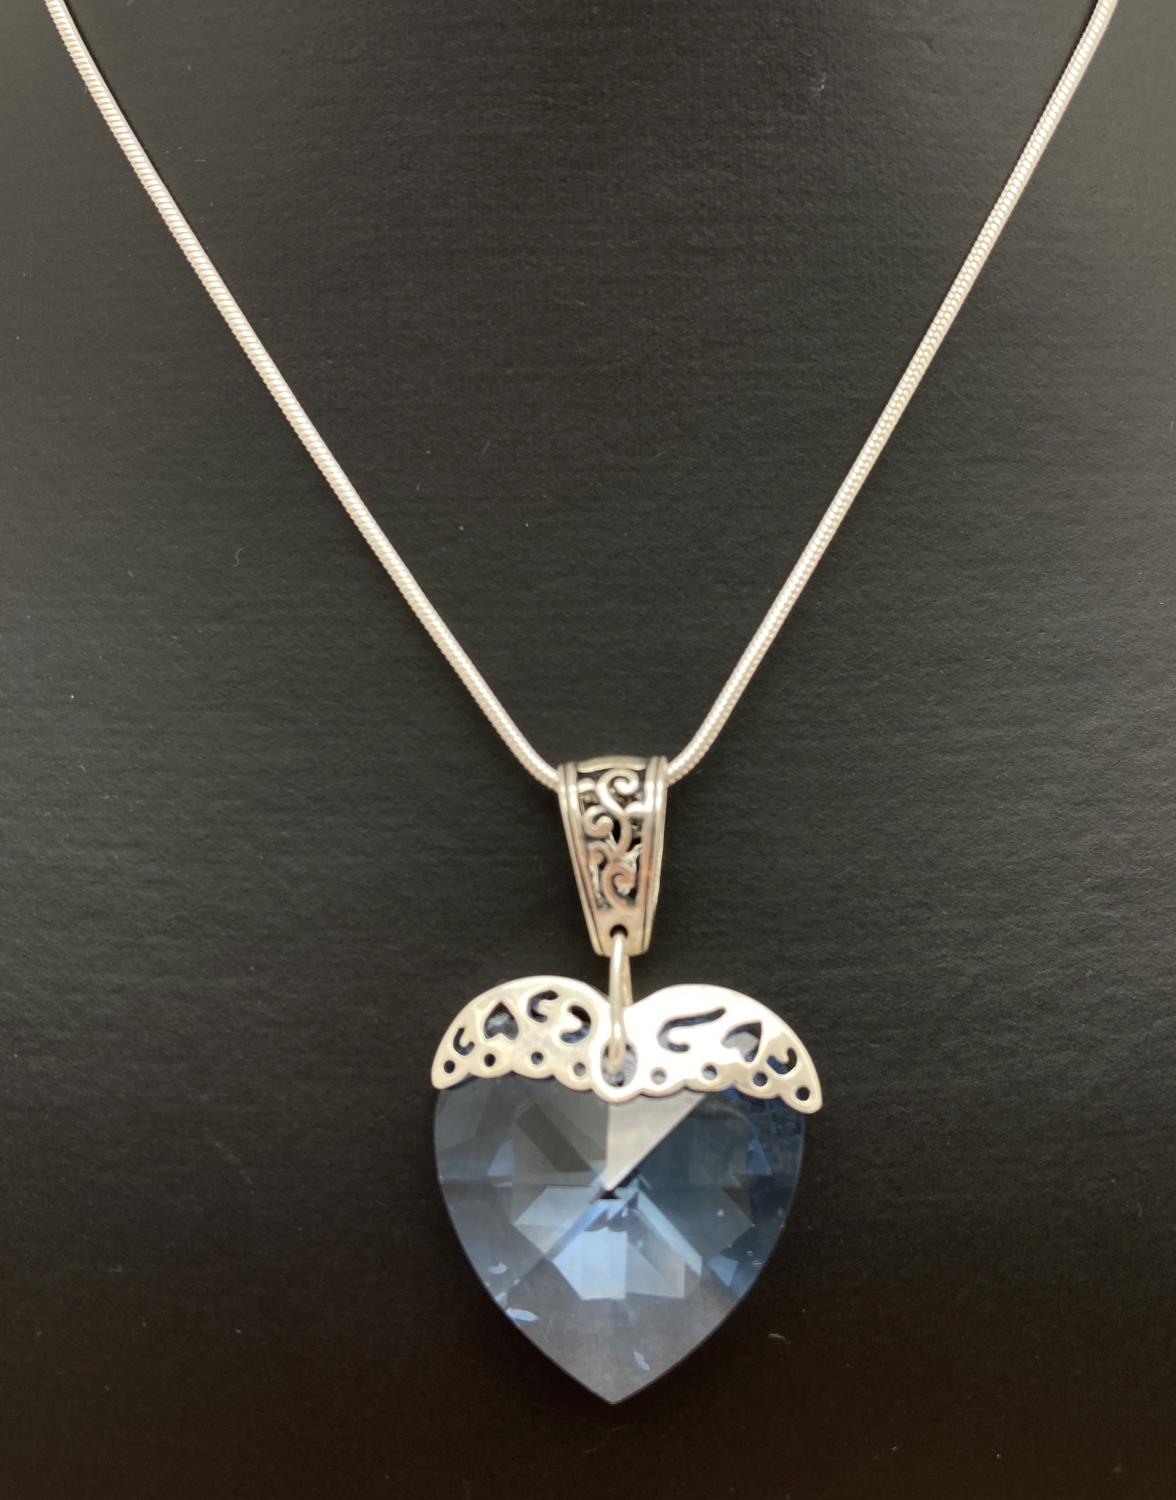 A large pale blue crystal heart shaped pendant with silver pierced work overlay and bale. On an